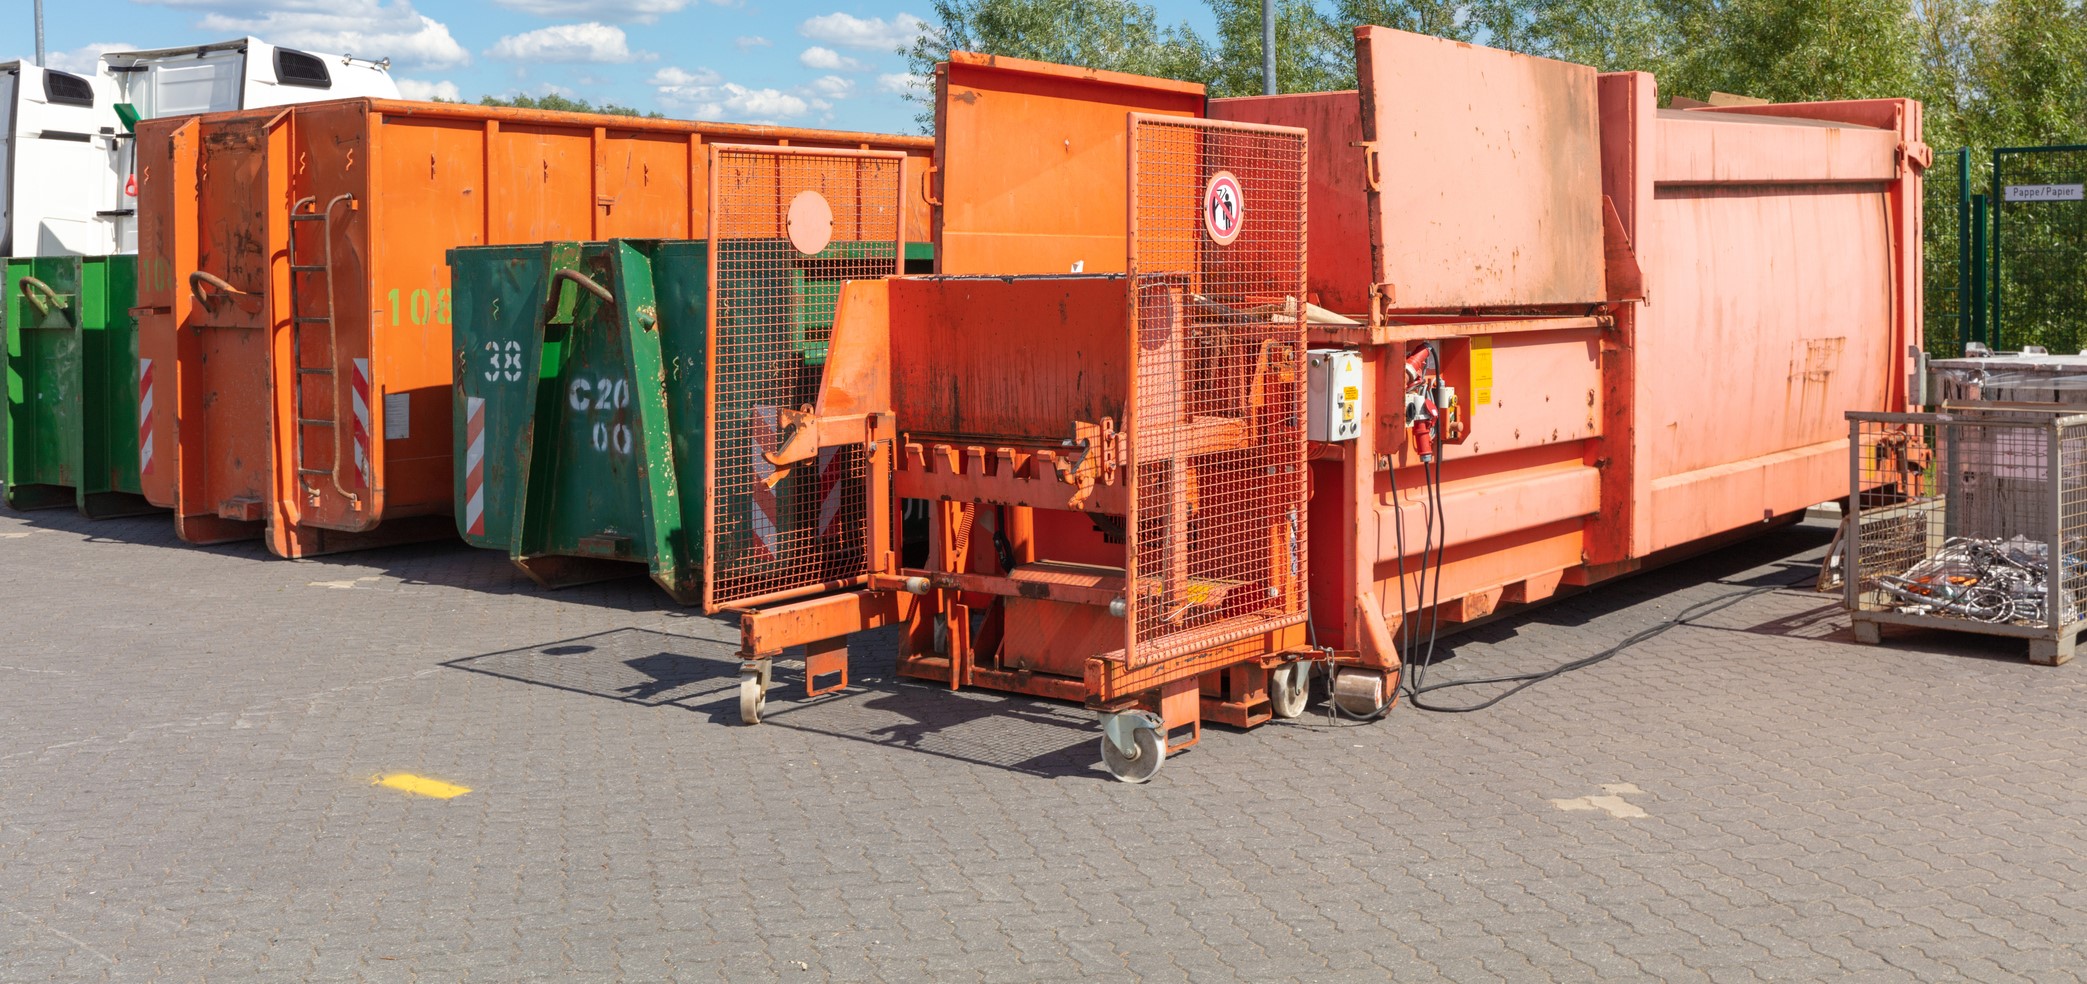 Why a Self-Contained Trash Compactor is Good for Business